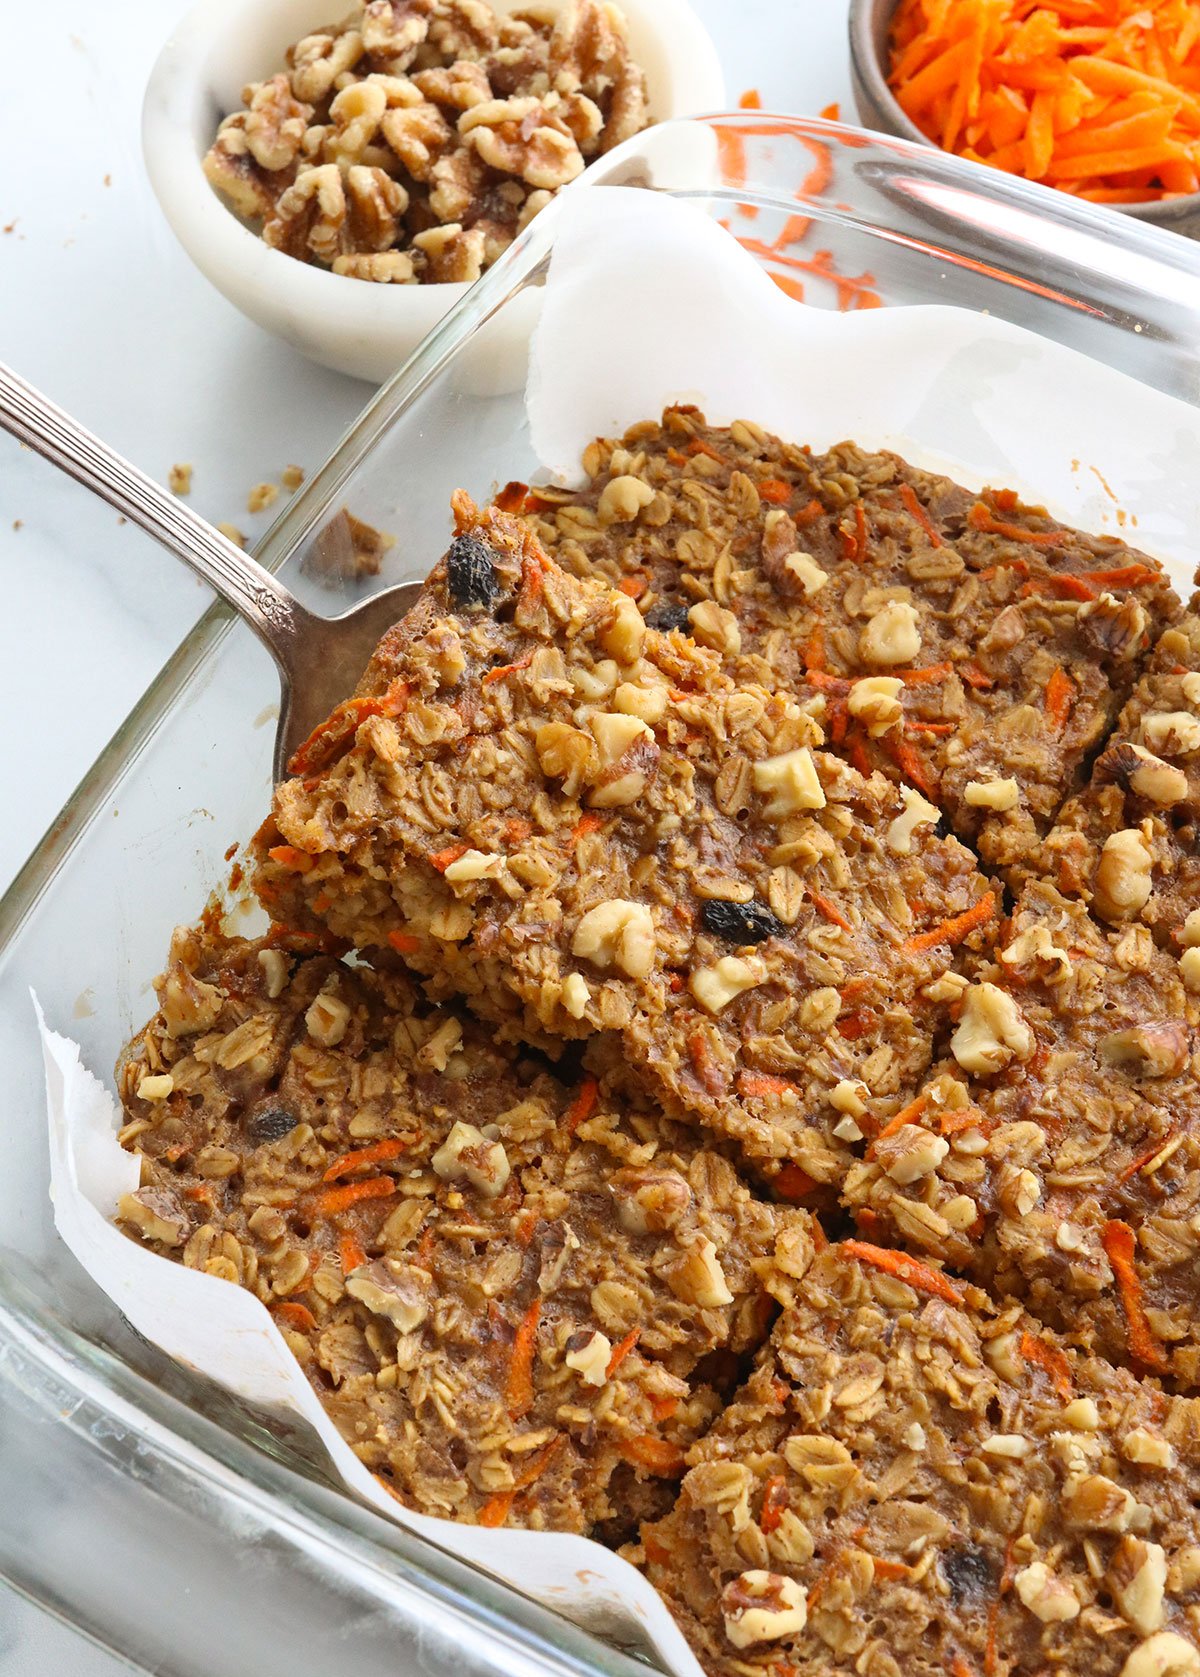 baked carrot cake oatmeal sliced into 6 large pieces and lifted out of pan.